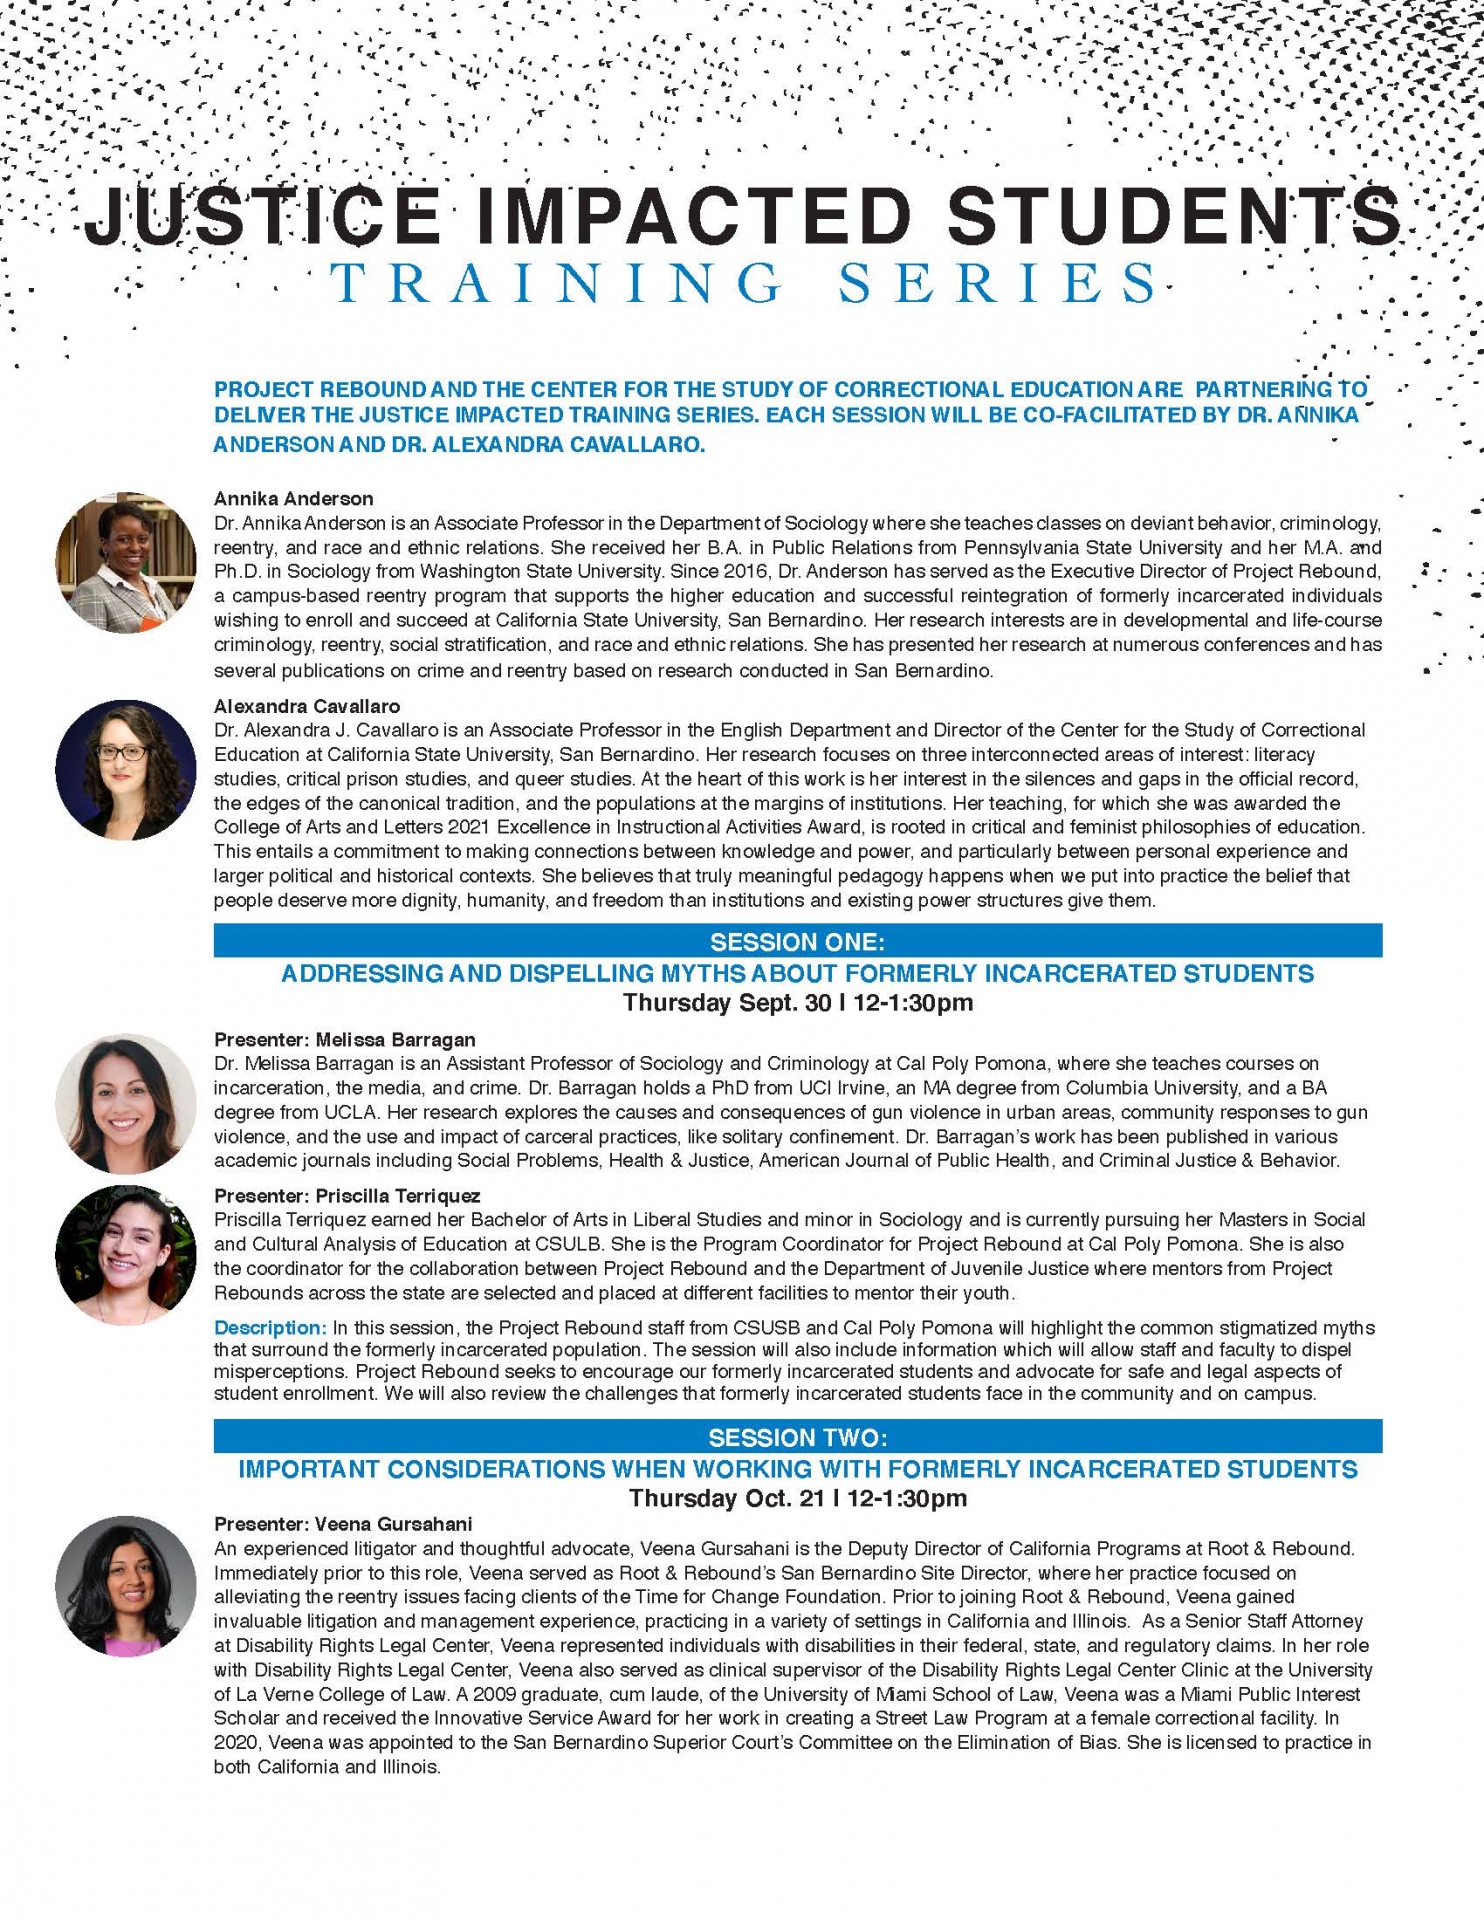 Justice Impacted Students Training Series